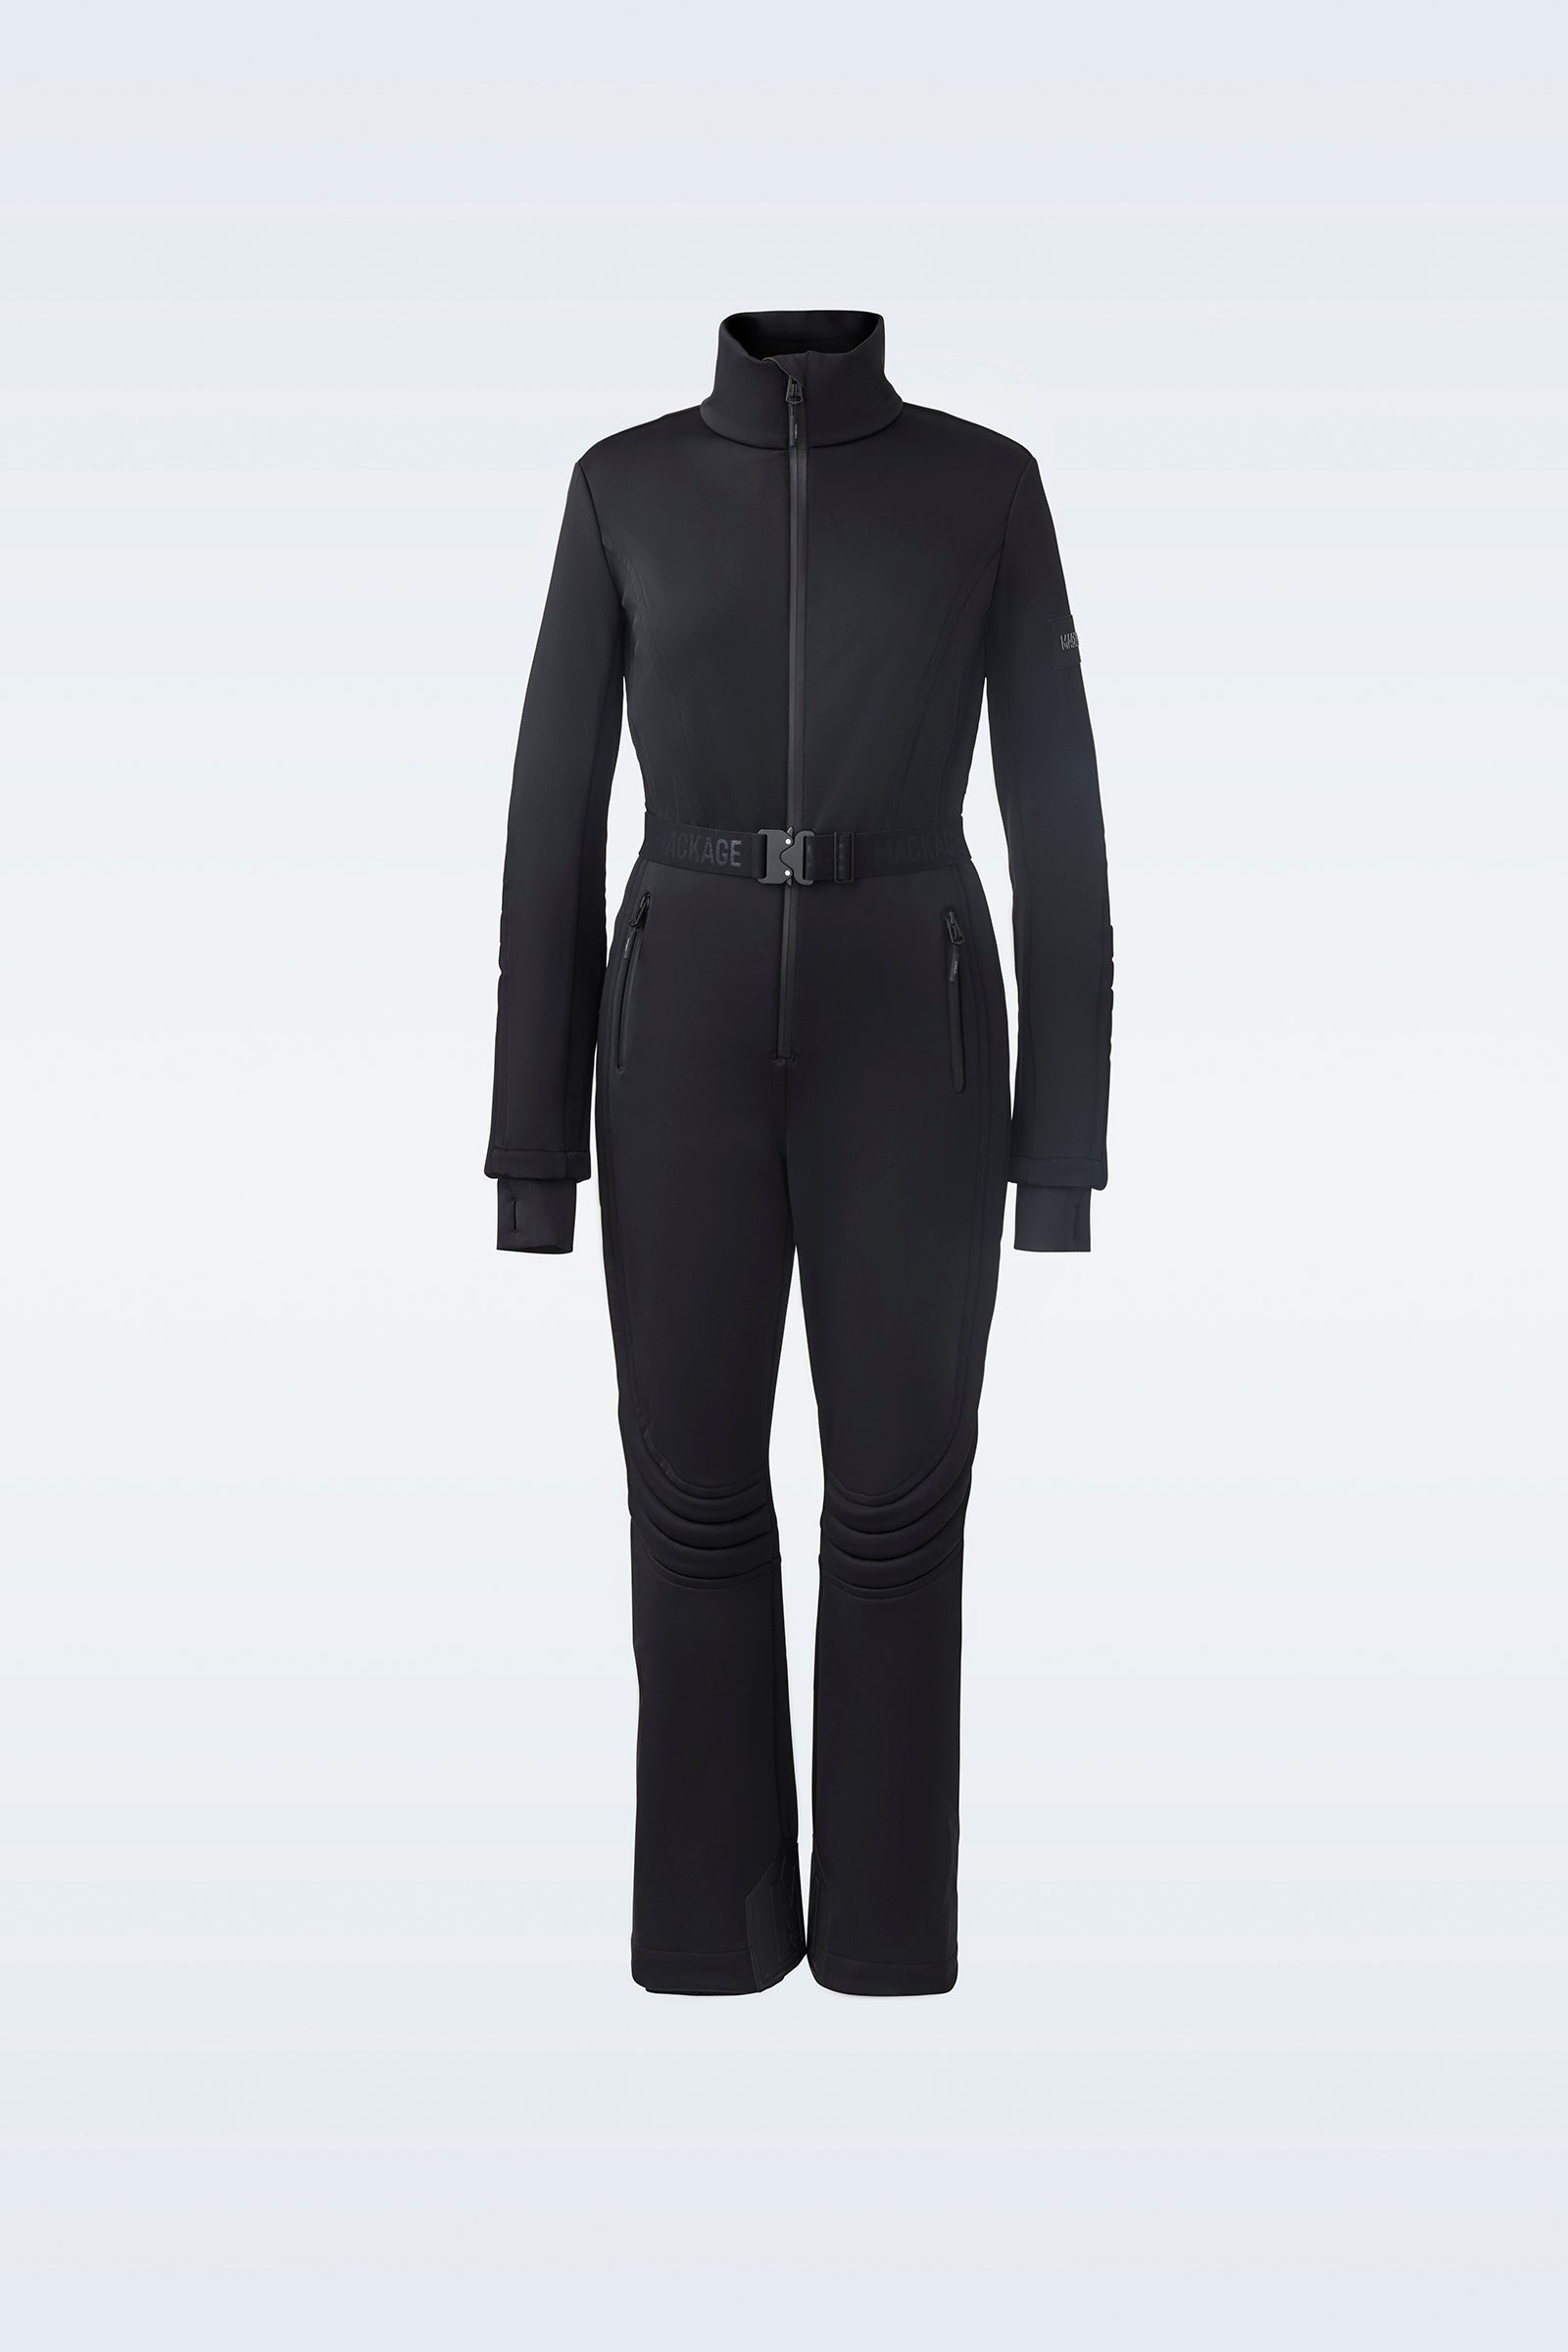 for Mackage® fleece ladies ski knees and sleeves | articulated US with Techno suit Shawna,